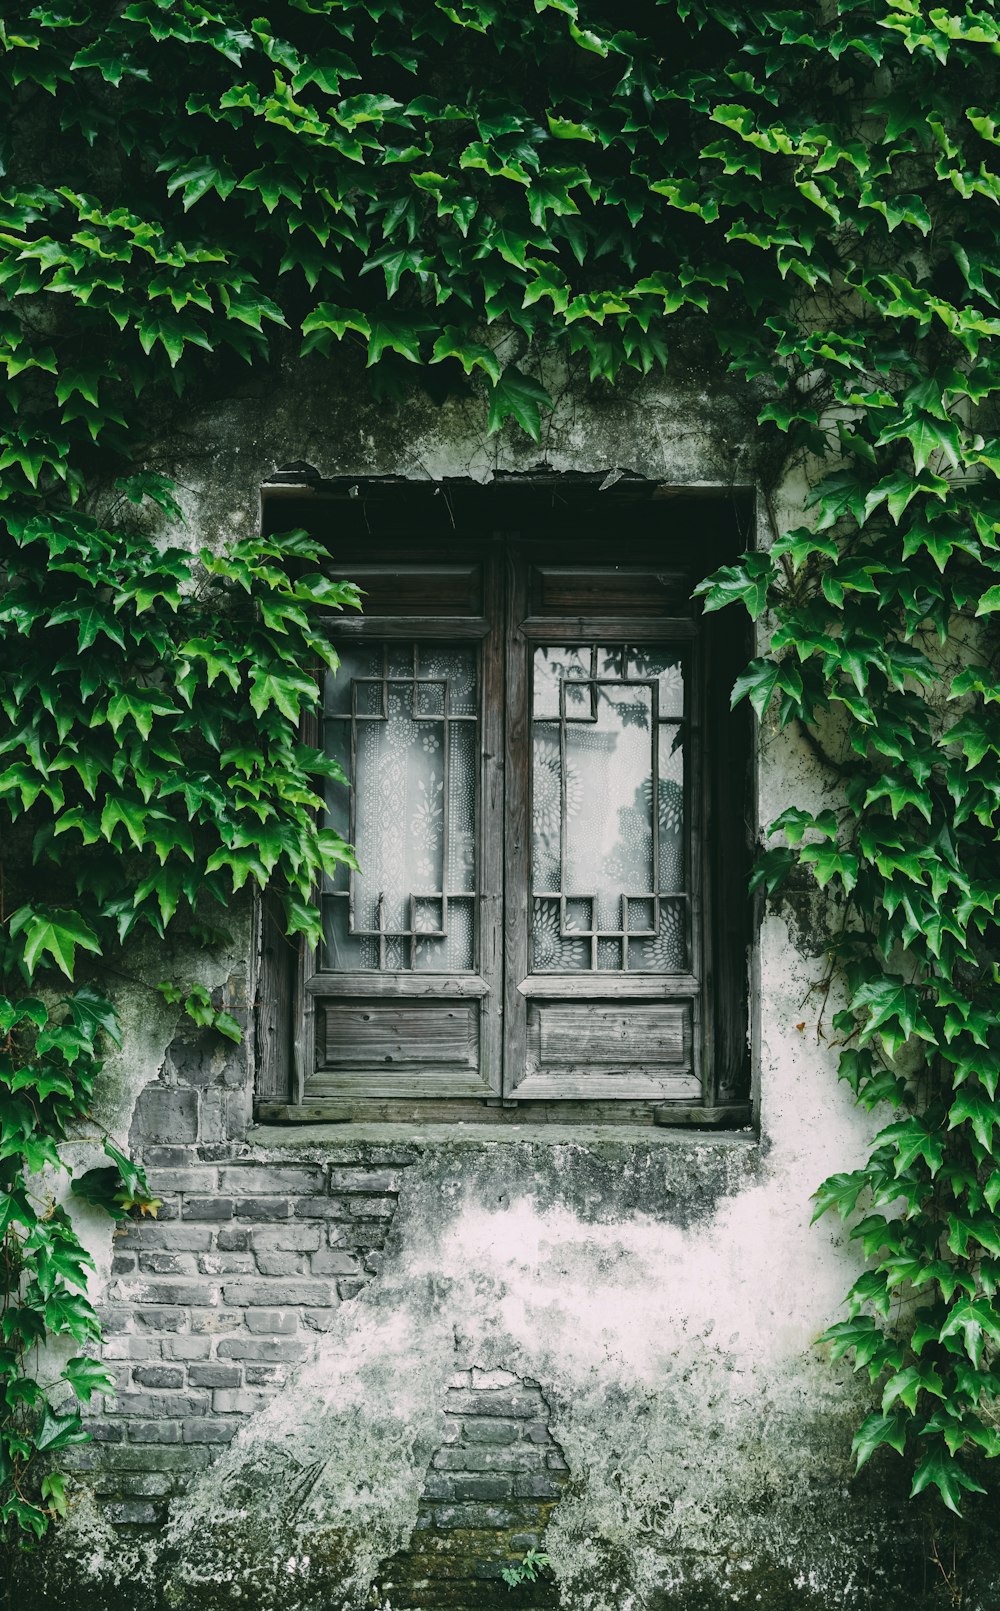 an old building covered in vines with a window